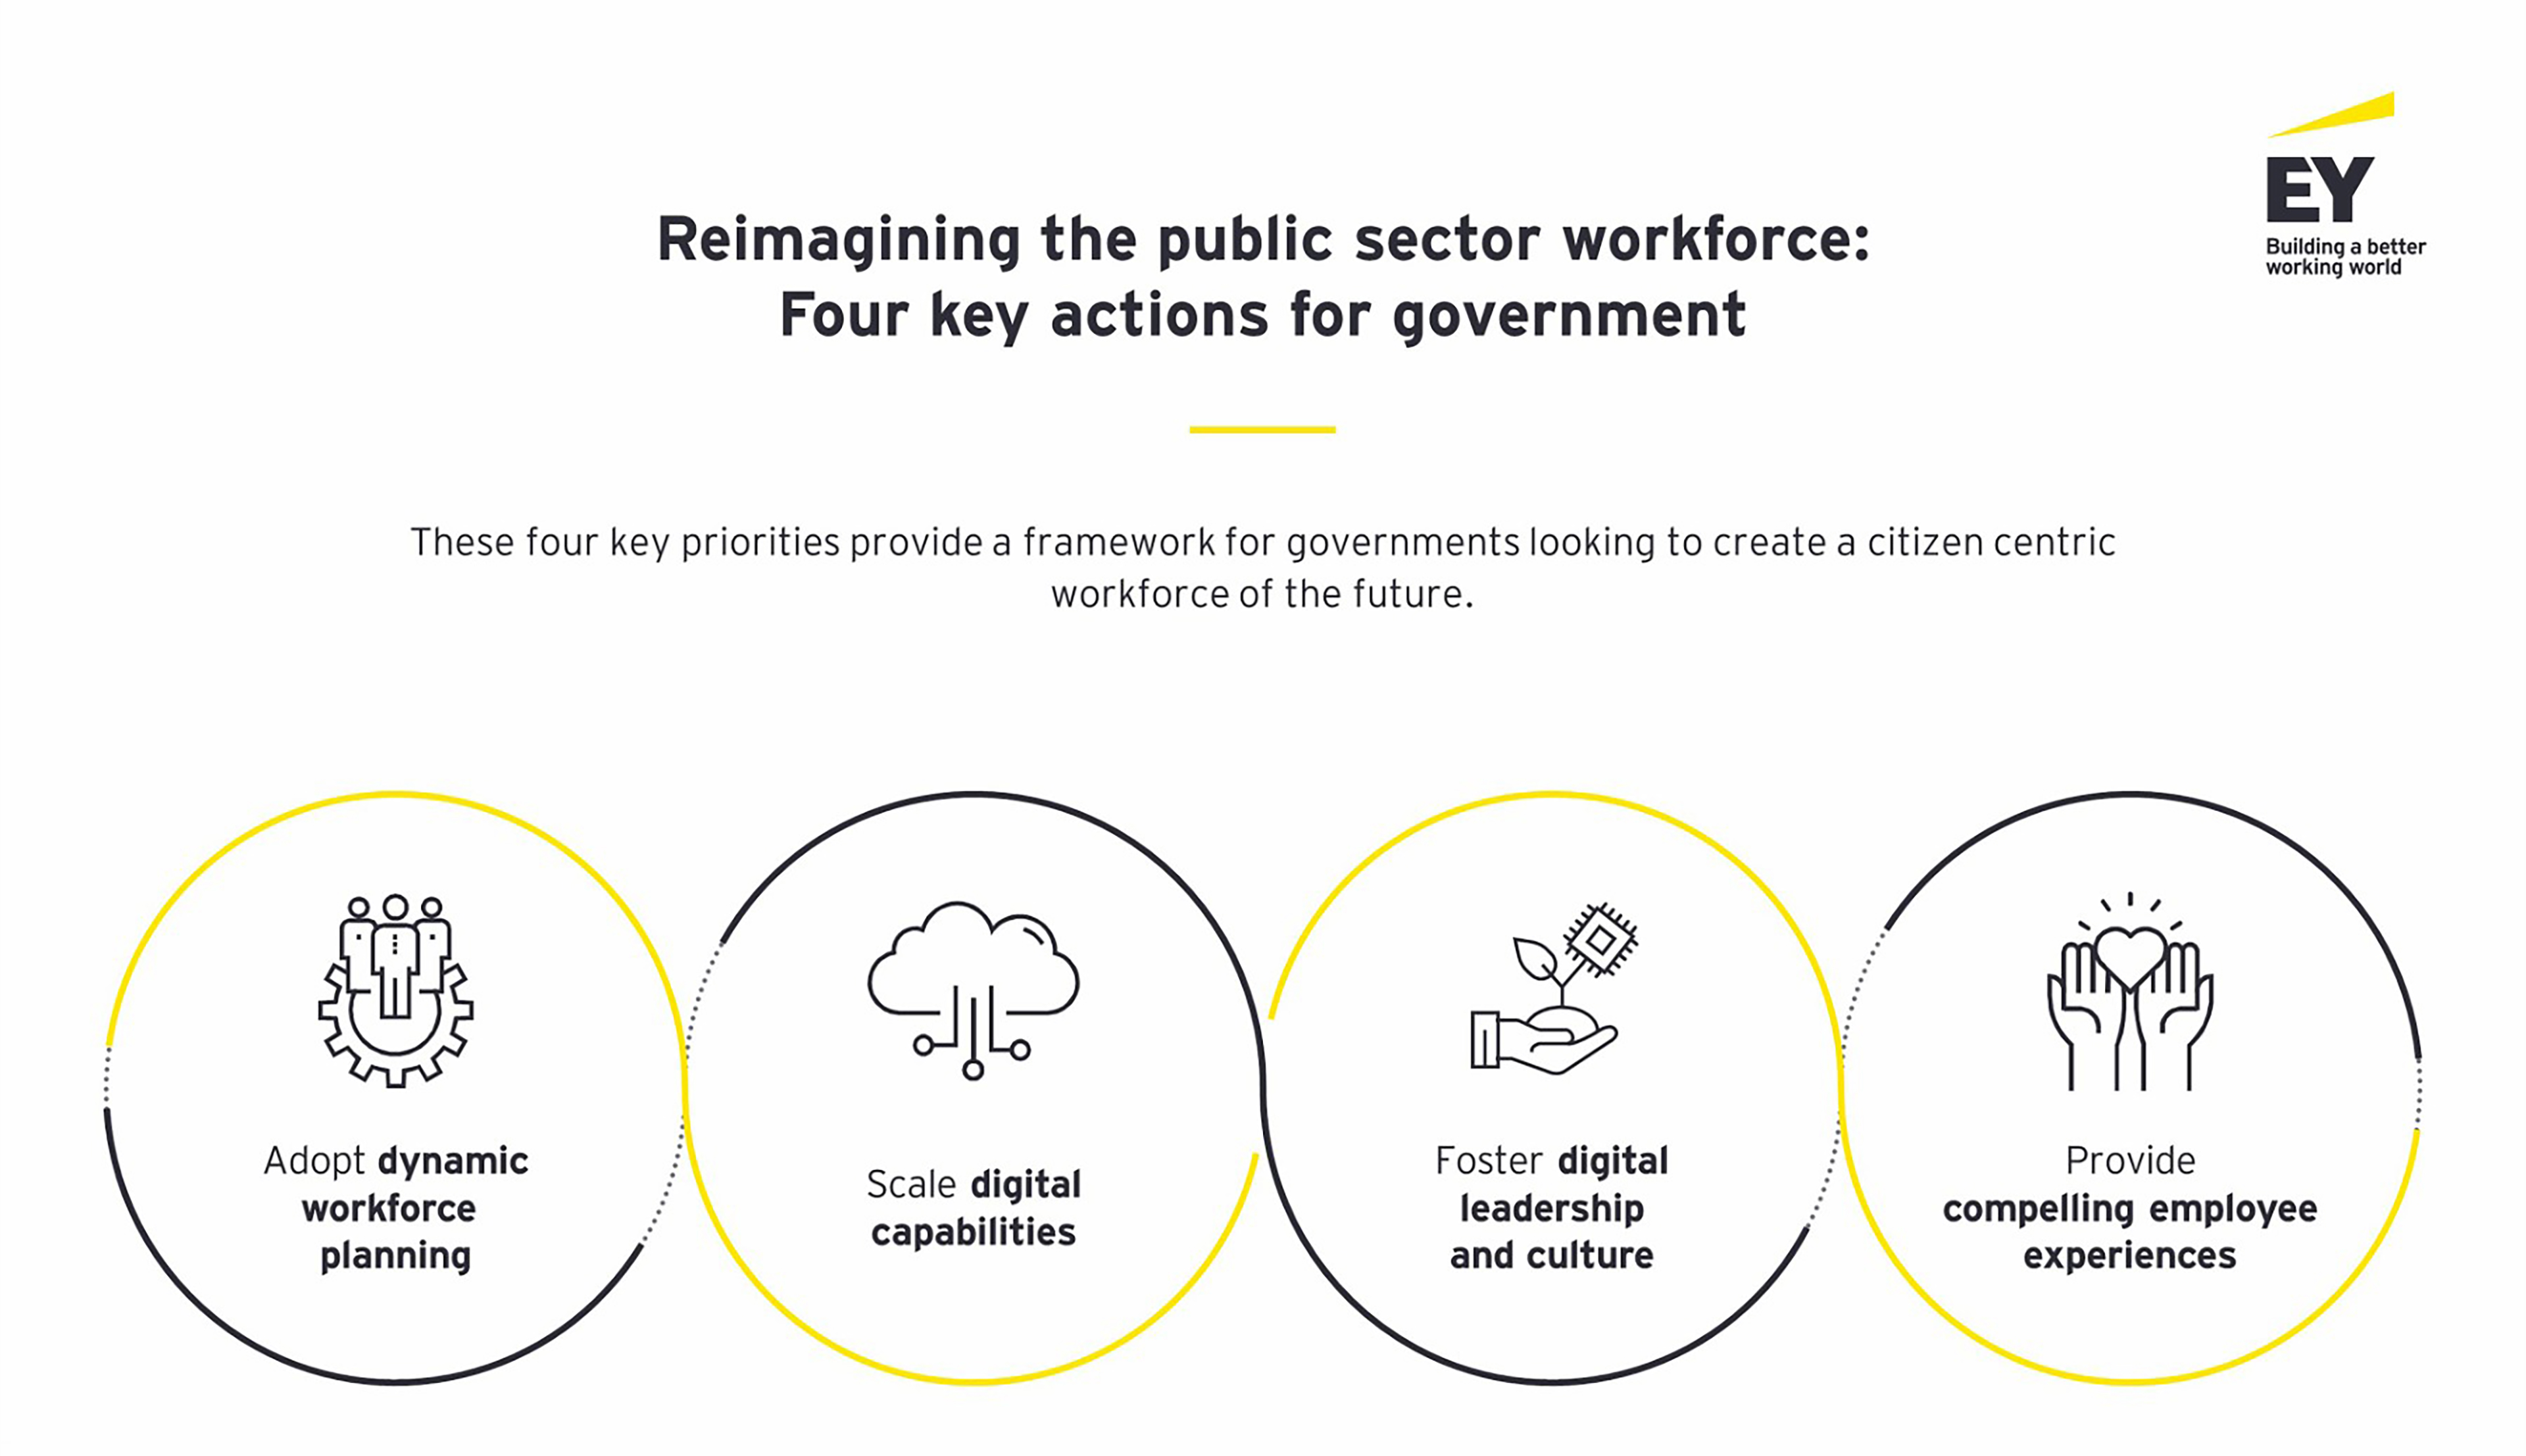 Reimagining the public sector workforce: Four key actions for government